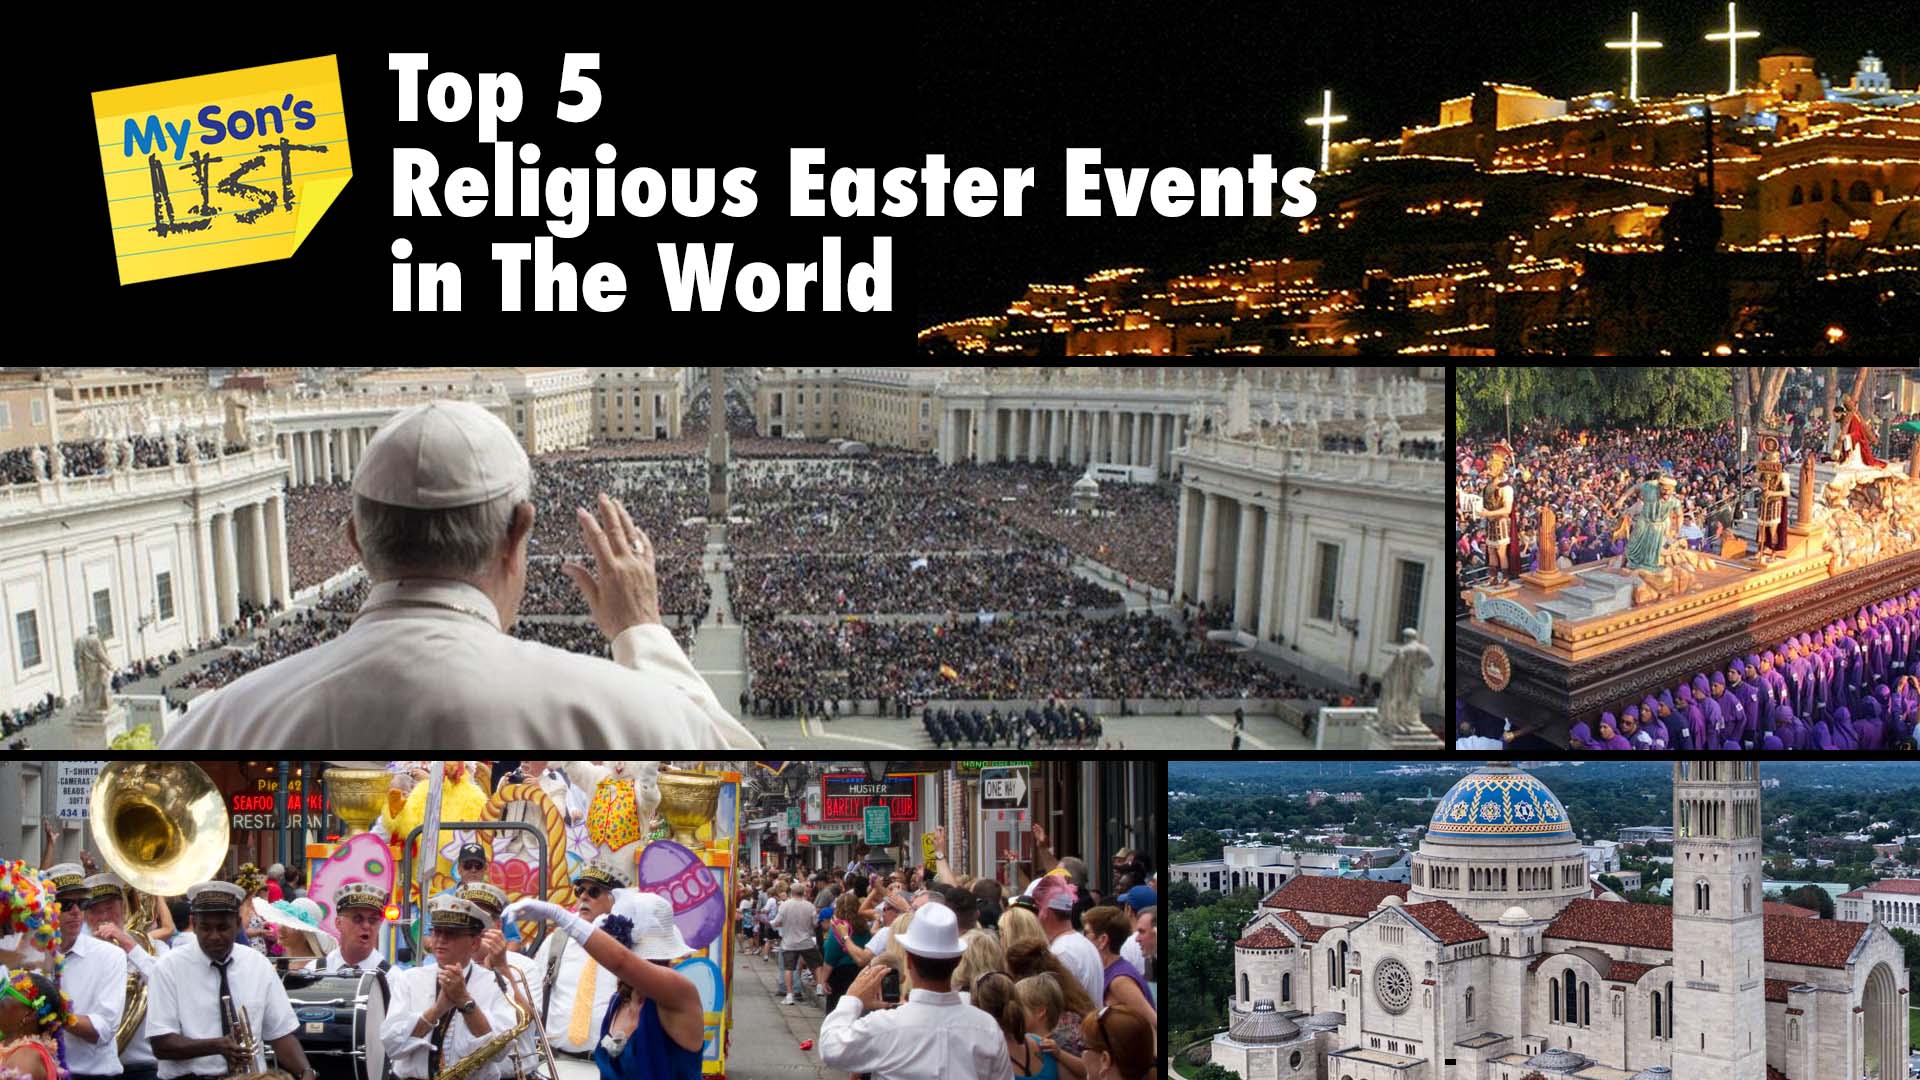 My Sons List of Top 5 Religious Easter Events in the World